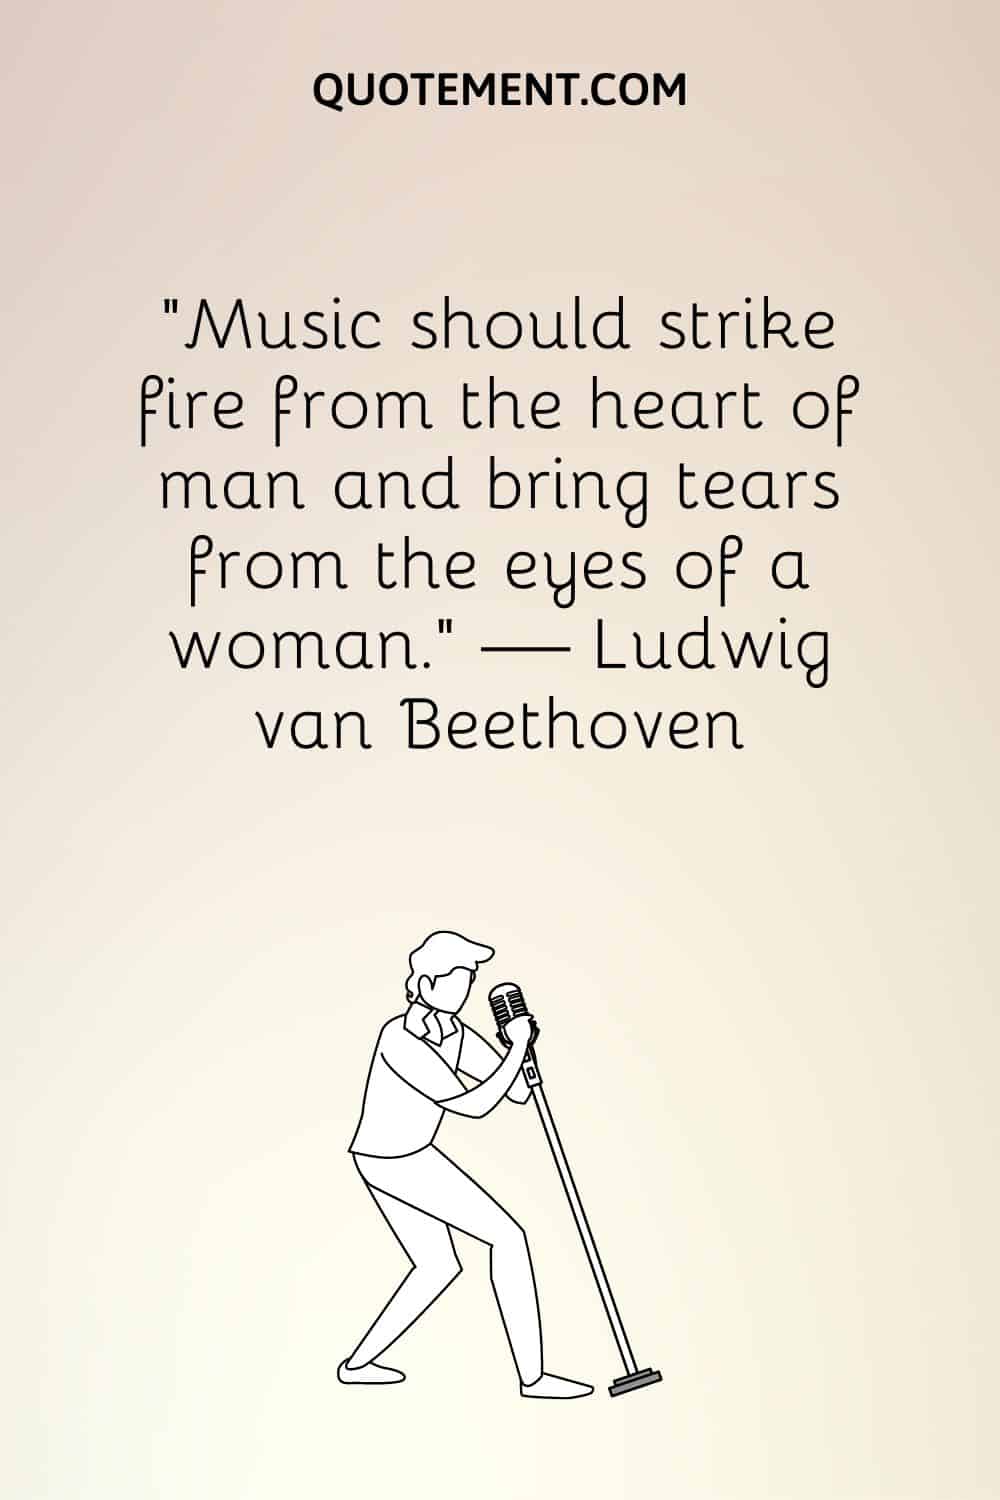 “Music should strike fire from the heart of man and bring tears from the eyes of a woman.” — Ludwig van Beethoven